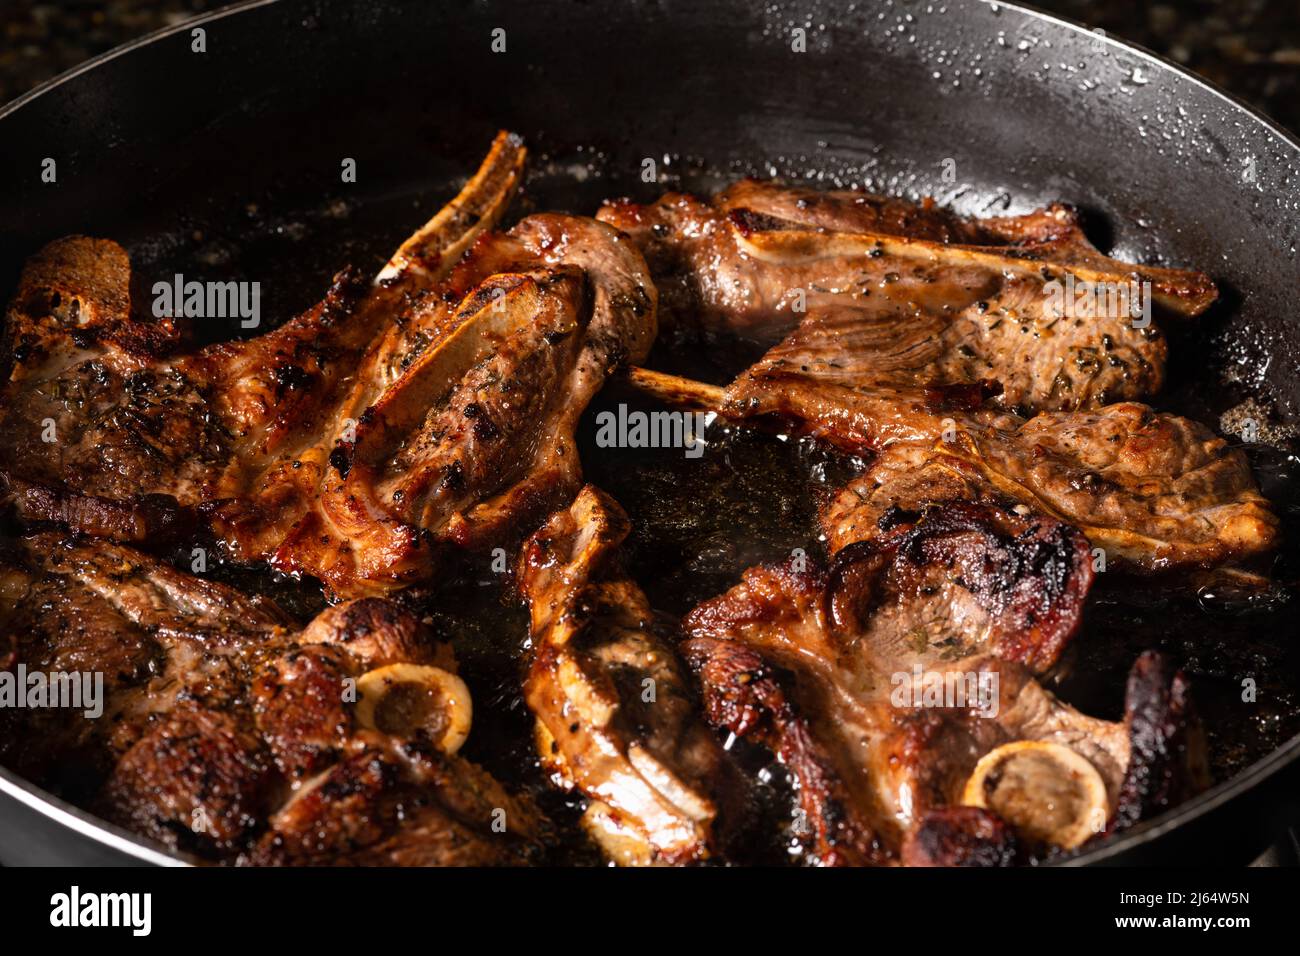 Cooking lamb loin chops in a frying pan. Cooking on a gas stove. Stock Photo